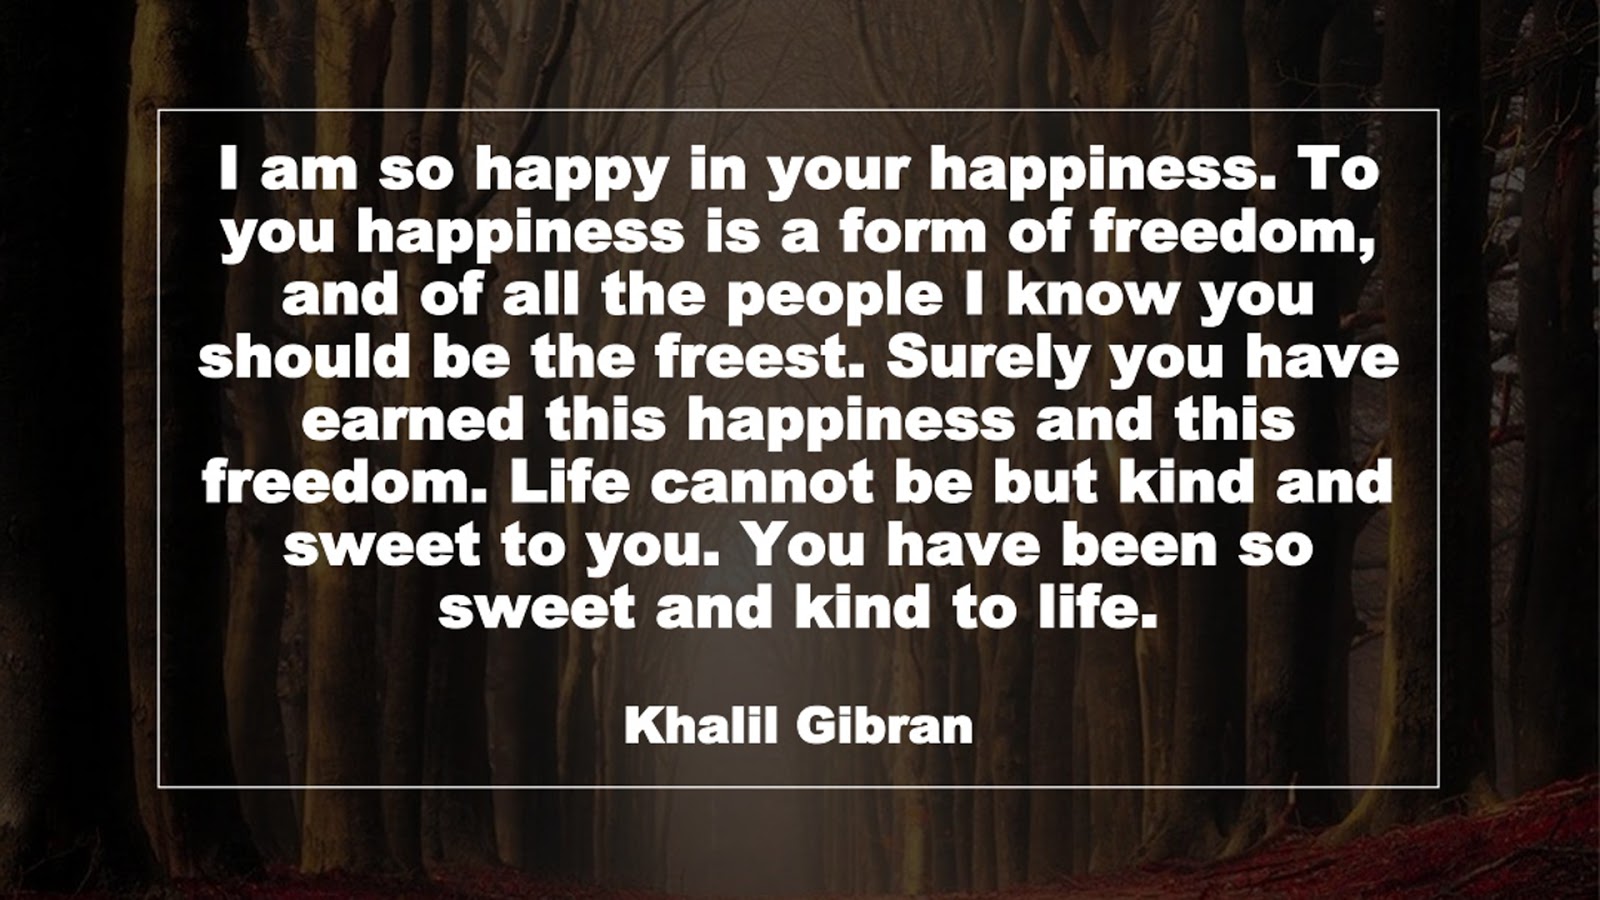 I am so happy in your happiness. To you happiness is a form of freedom, and of all the people I know you should be the freest. Surely you have earned this happiness and this freedom. Life cannot be but kind and sweet to you. You have been so sweet and kind to life. (Khalil Gibran)